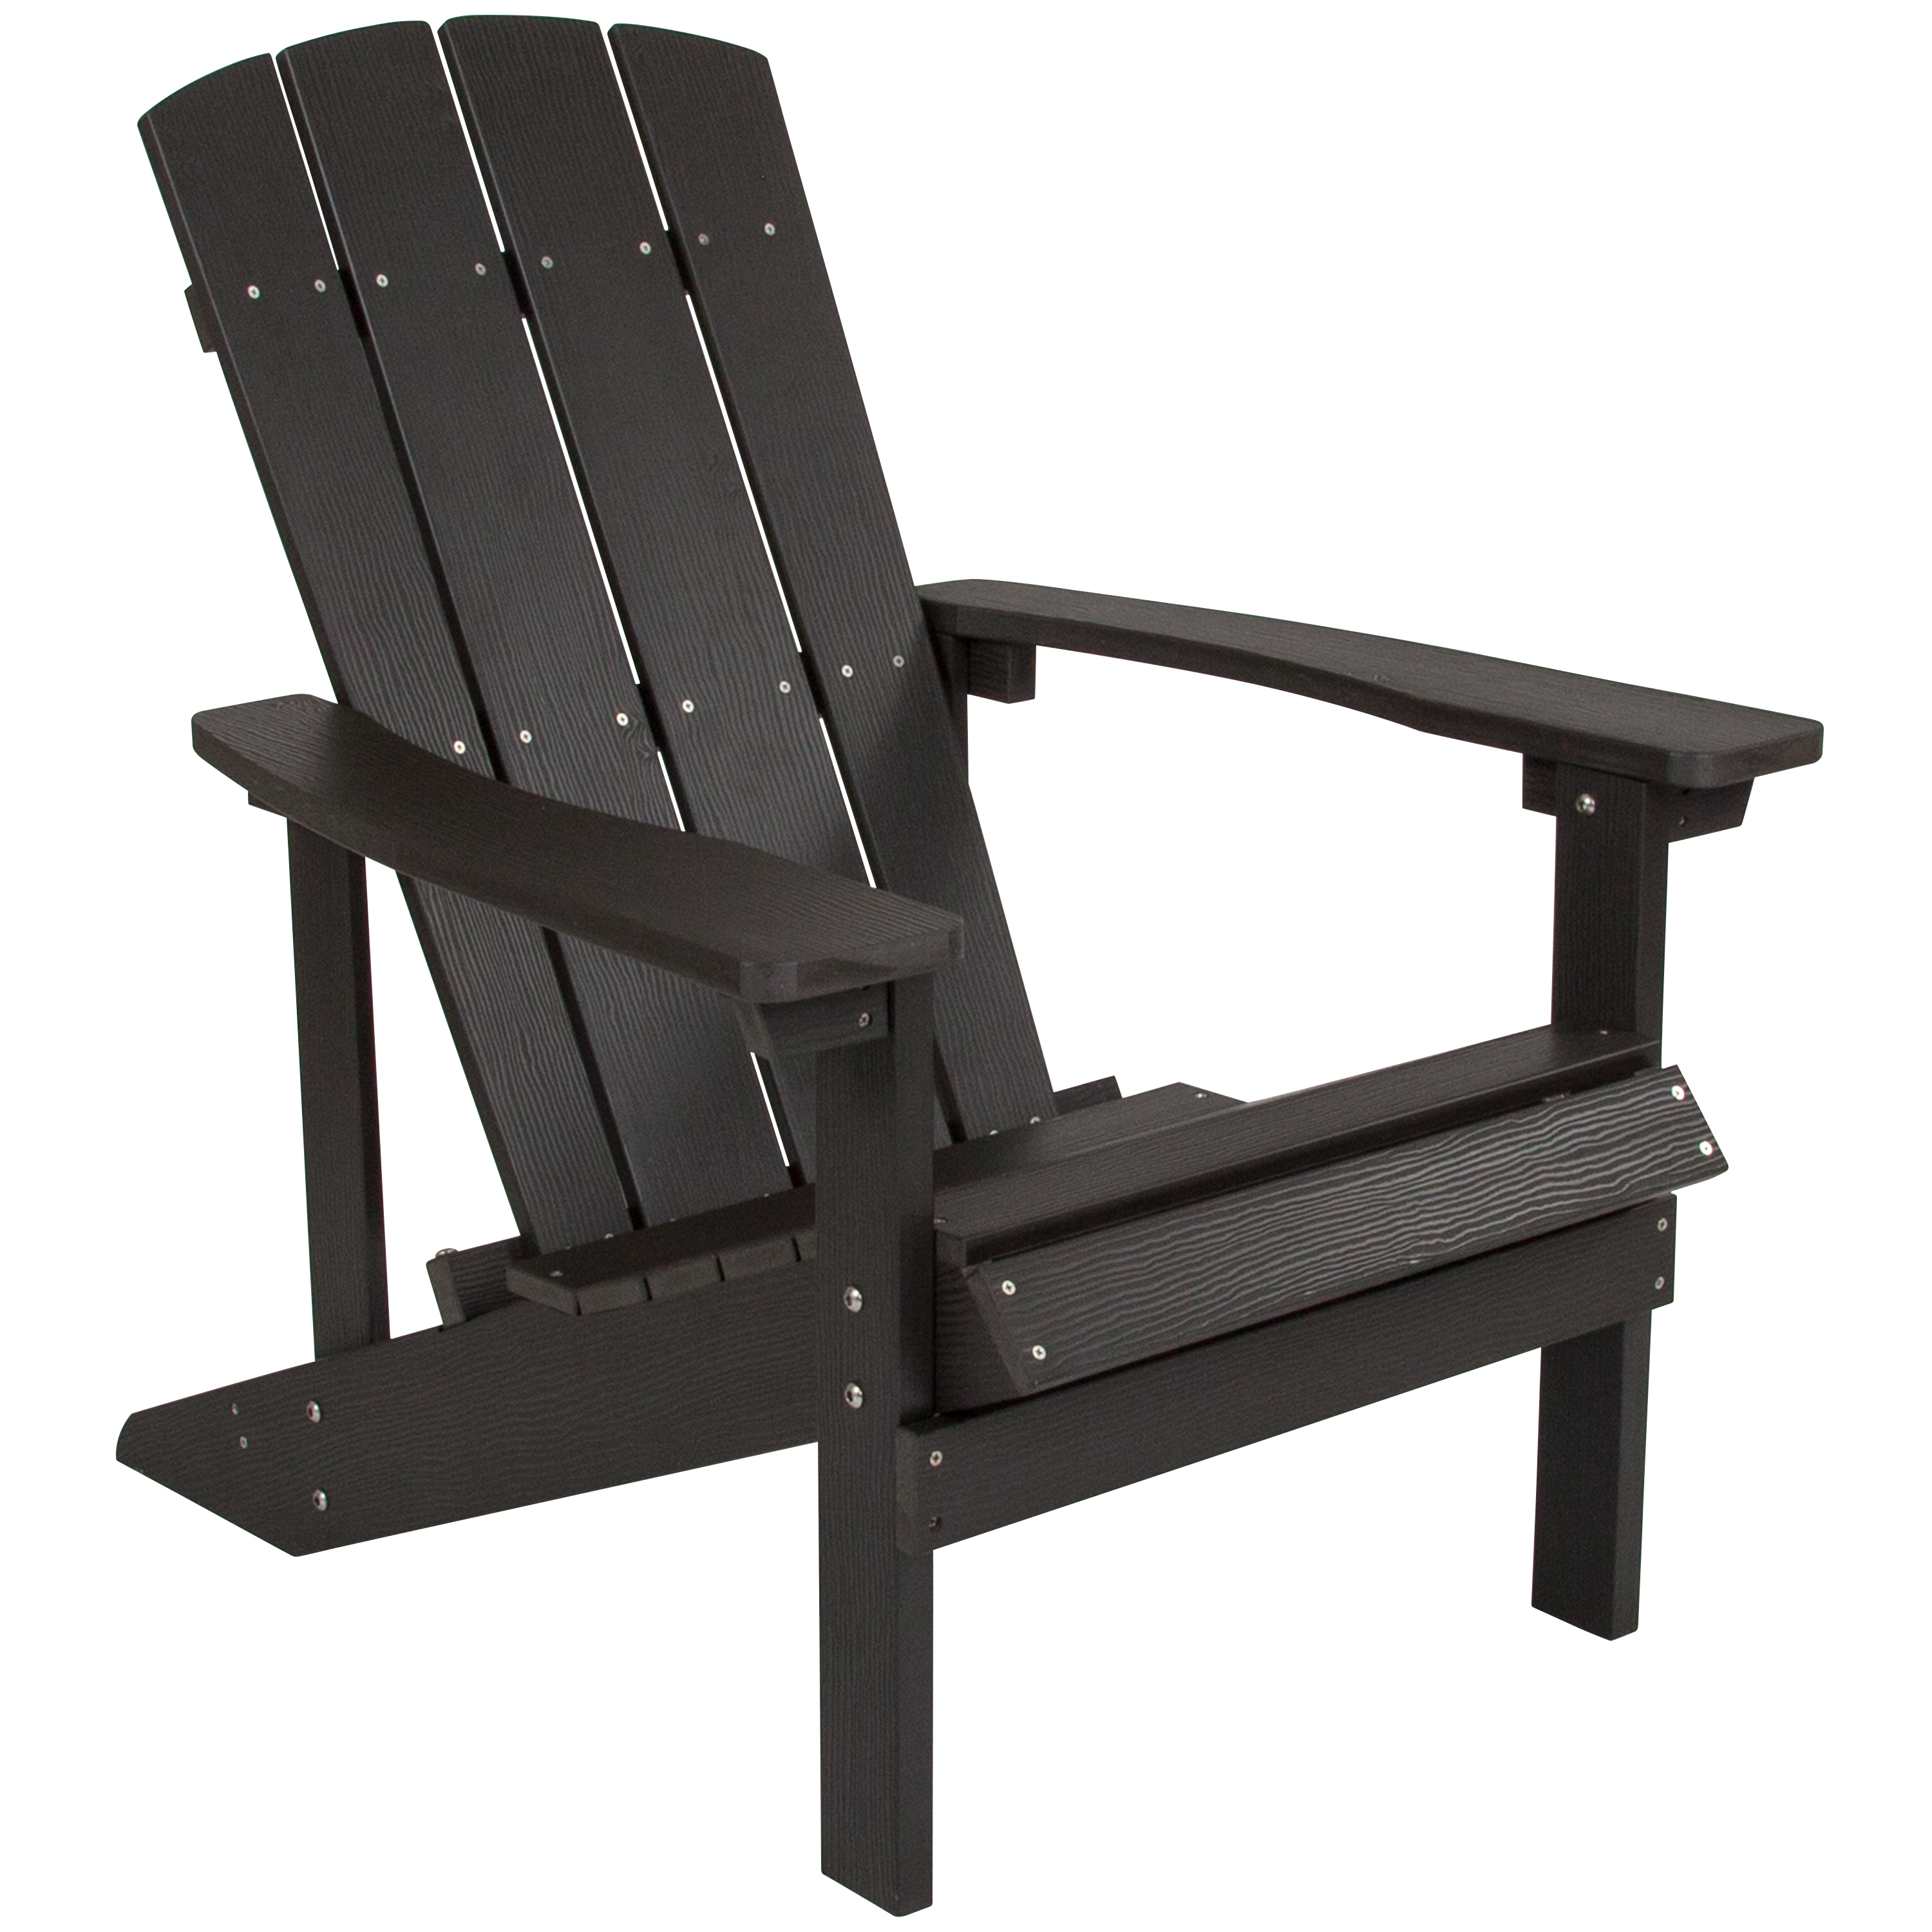 Flash Furniture Charlestown All-Weather Poly Resin Wood Adirondack Chair in Slate Gray - image 2 of 11